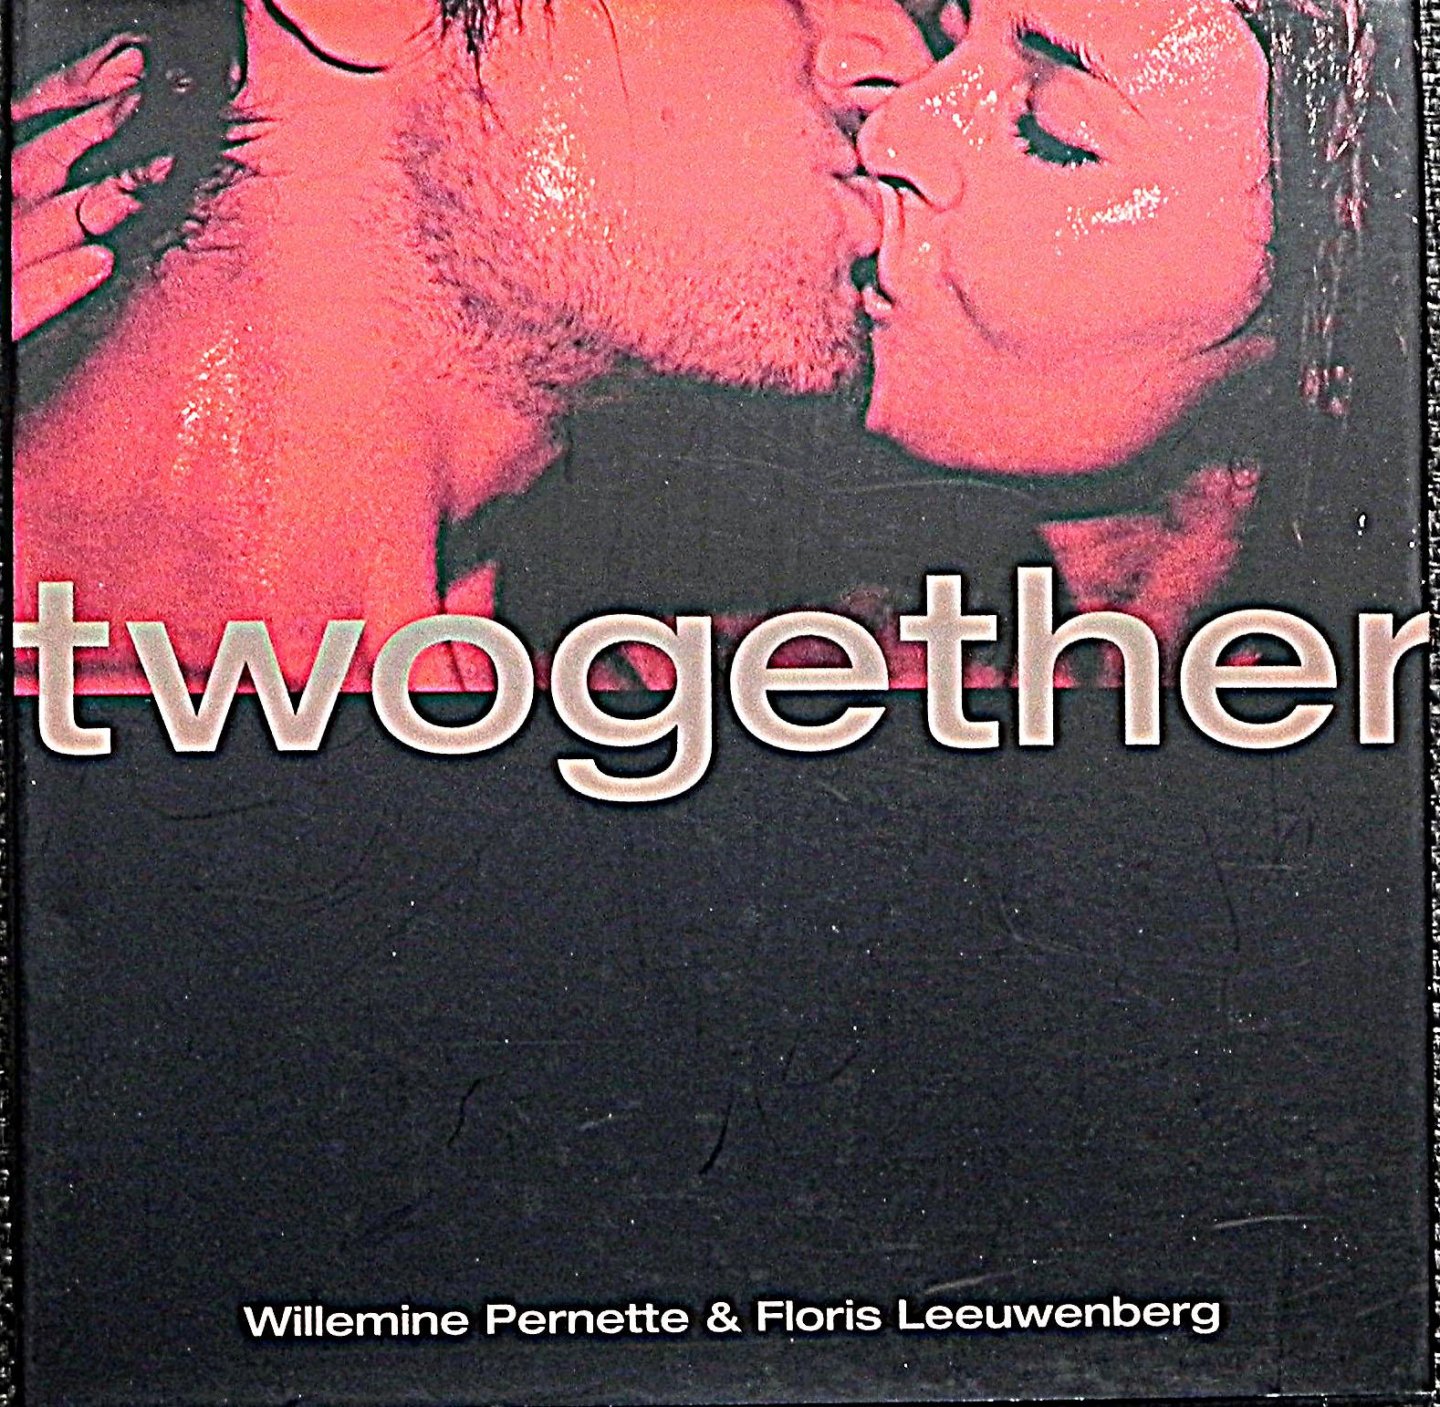 Pernette, W. and Leeuwenberg, F. - Twogether.